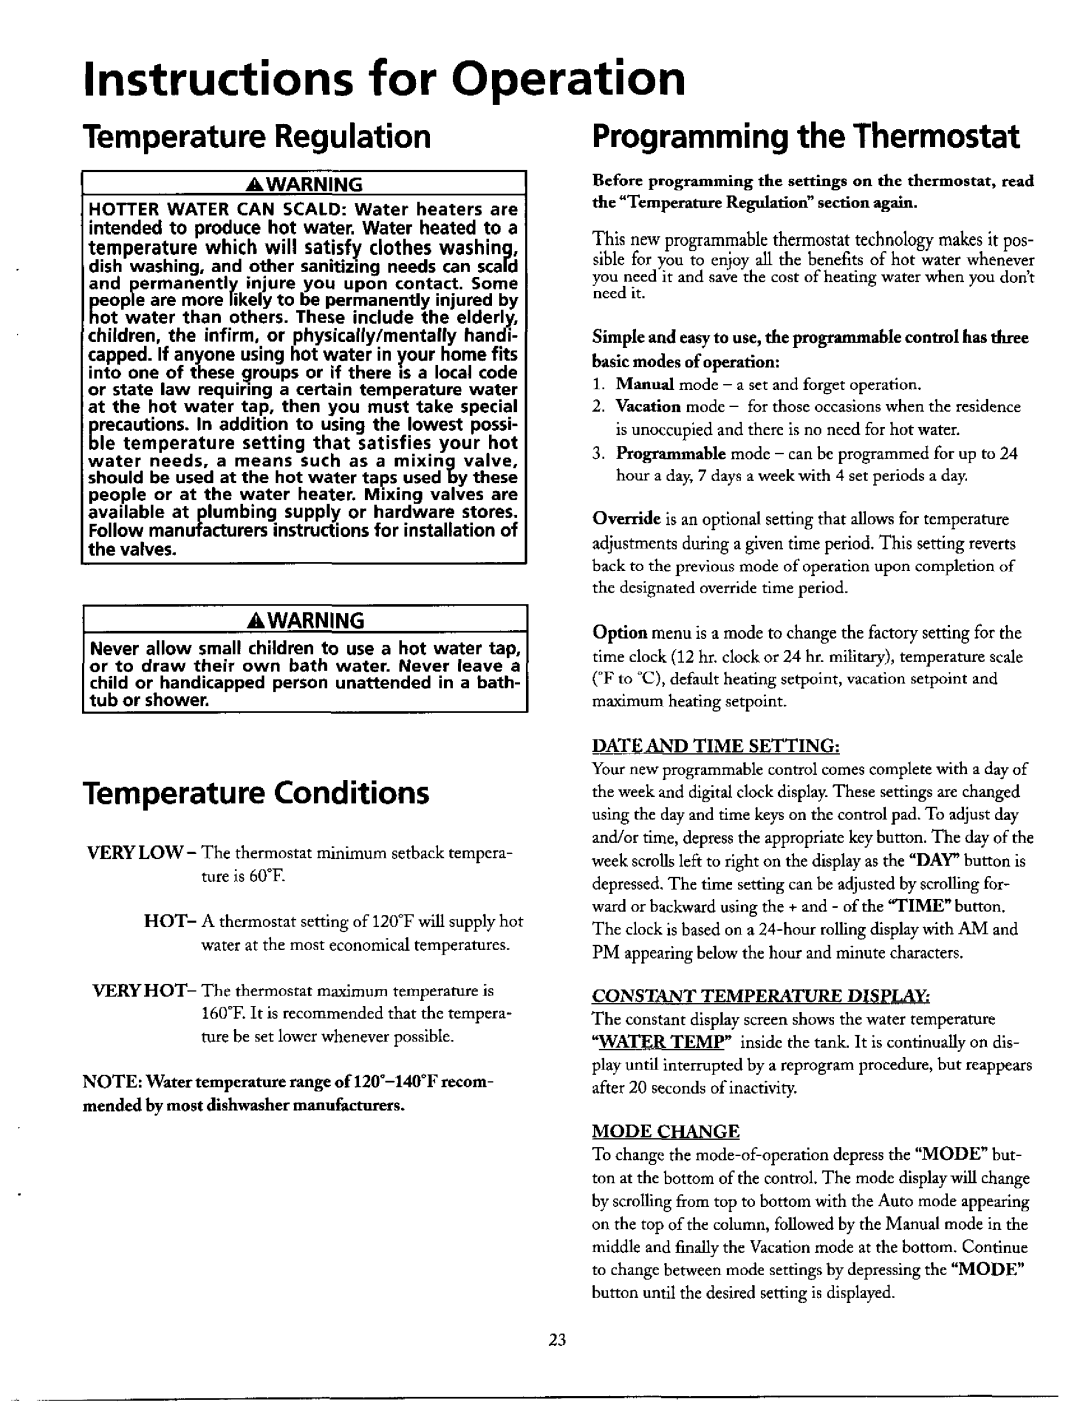 Maytag HE21282PC Instructions for Operation, Temperature Regulation, Programming the Thermostat, Temperature Conditions 